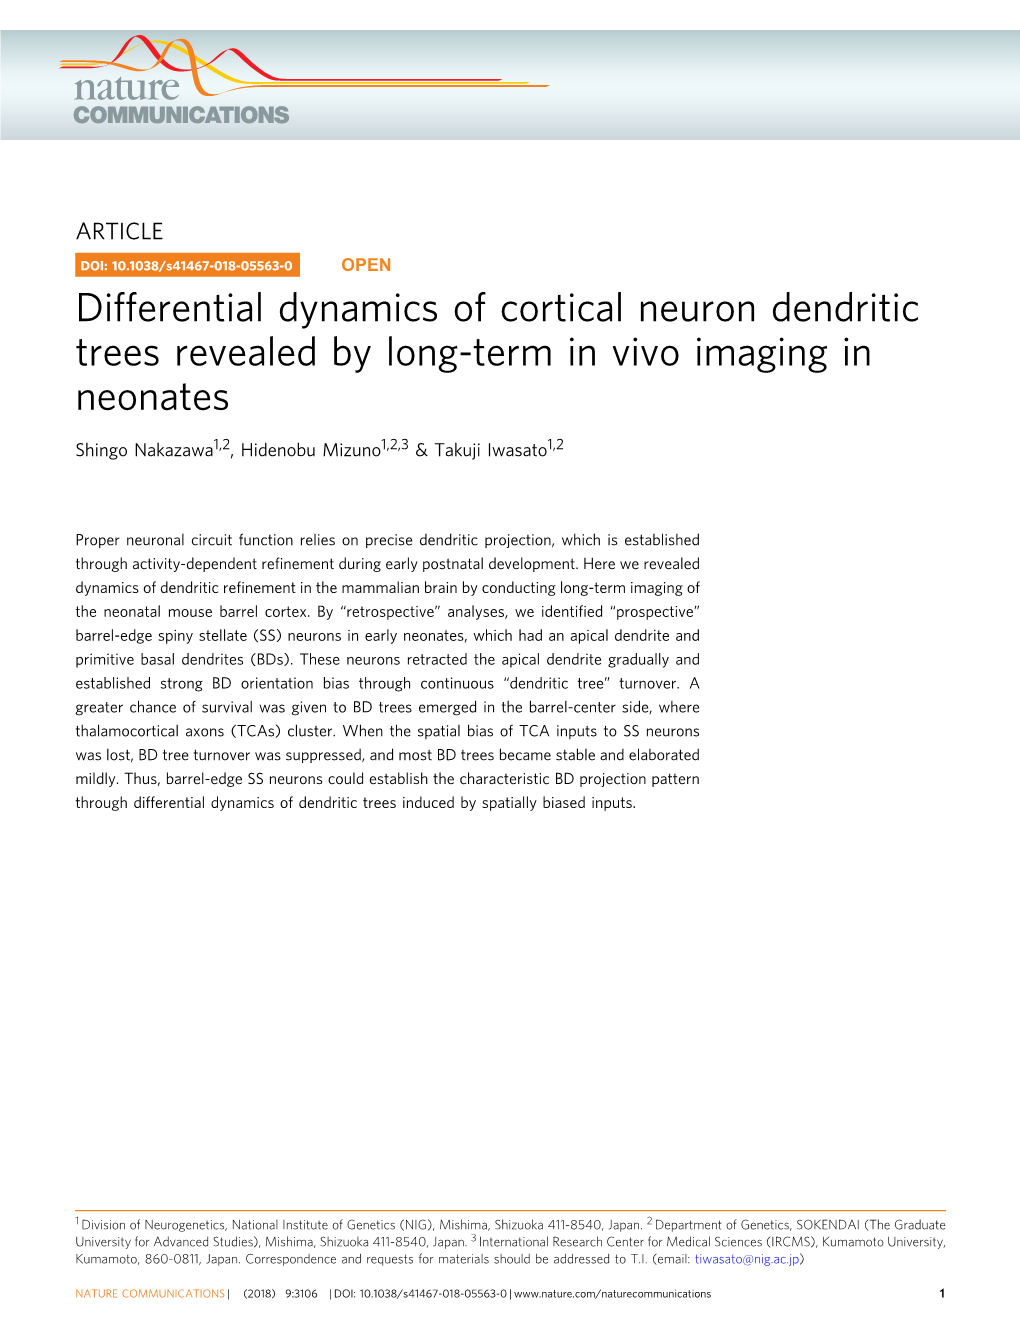 Differential Dynamics of Cortical Neuron Dendritic Trees Revealed by Long-Term in Vivo Imaging in Neonates